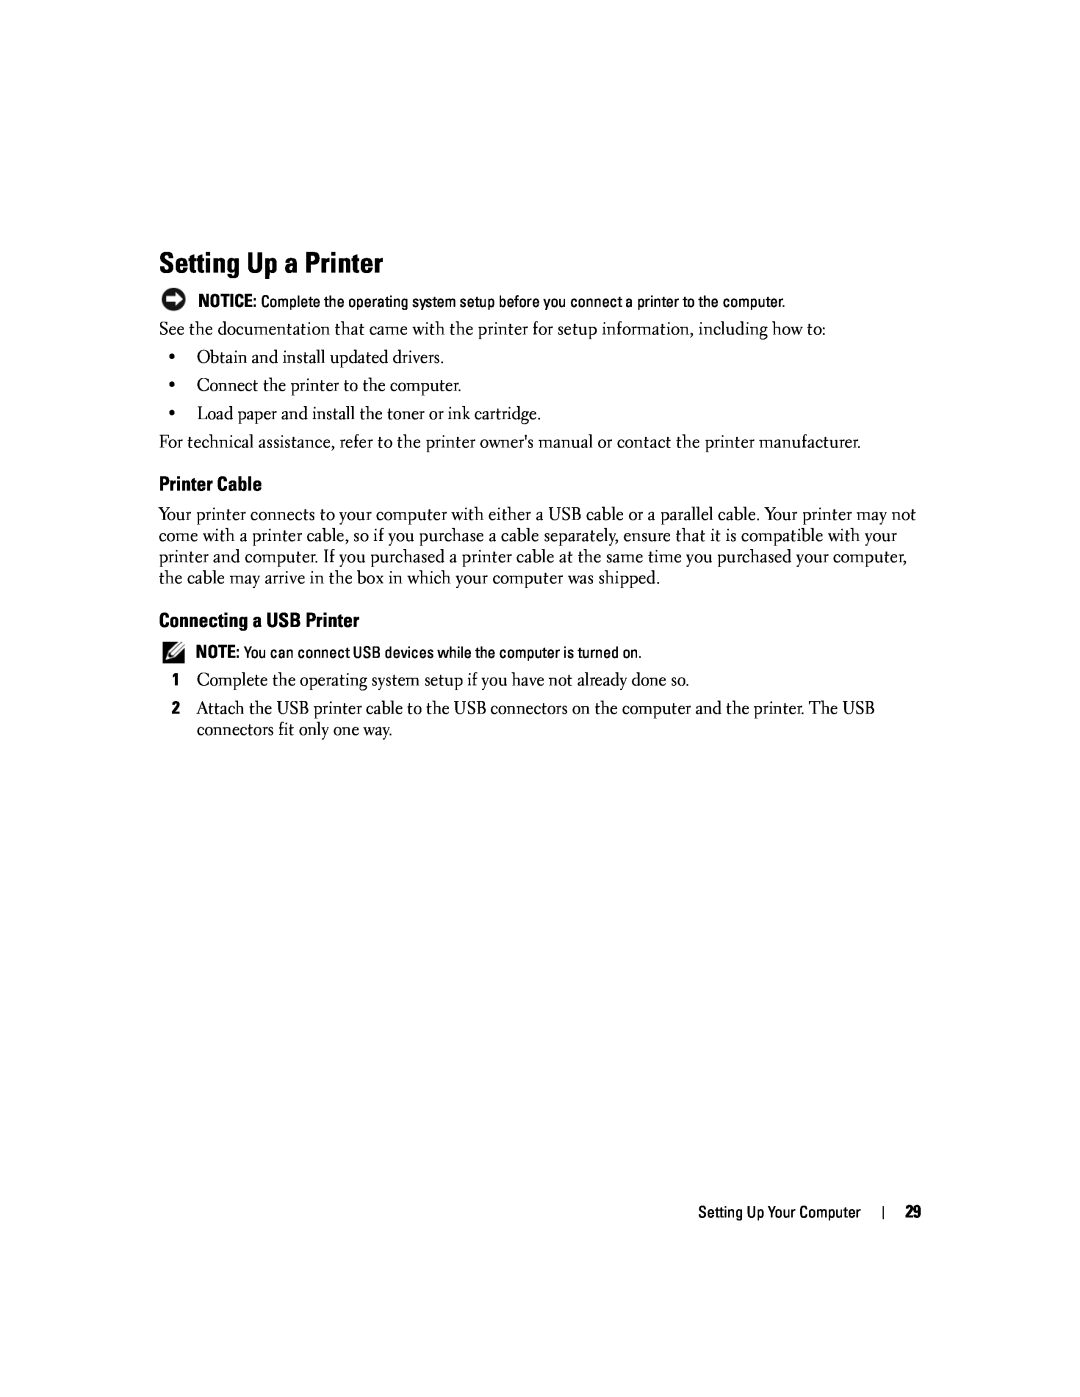 Dell PP20L owner manual Setting Up a Printer, Printer Cable, Connecting a USB Printer 